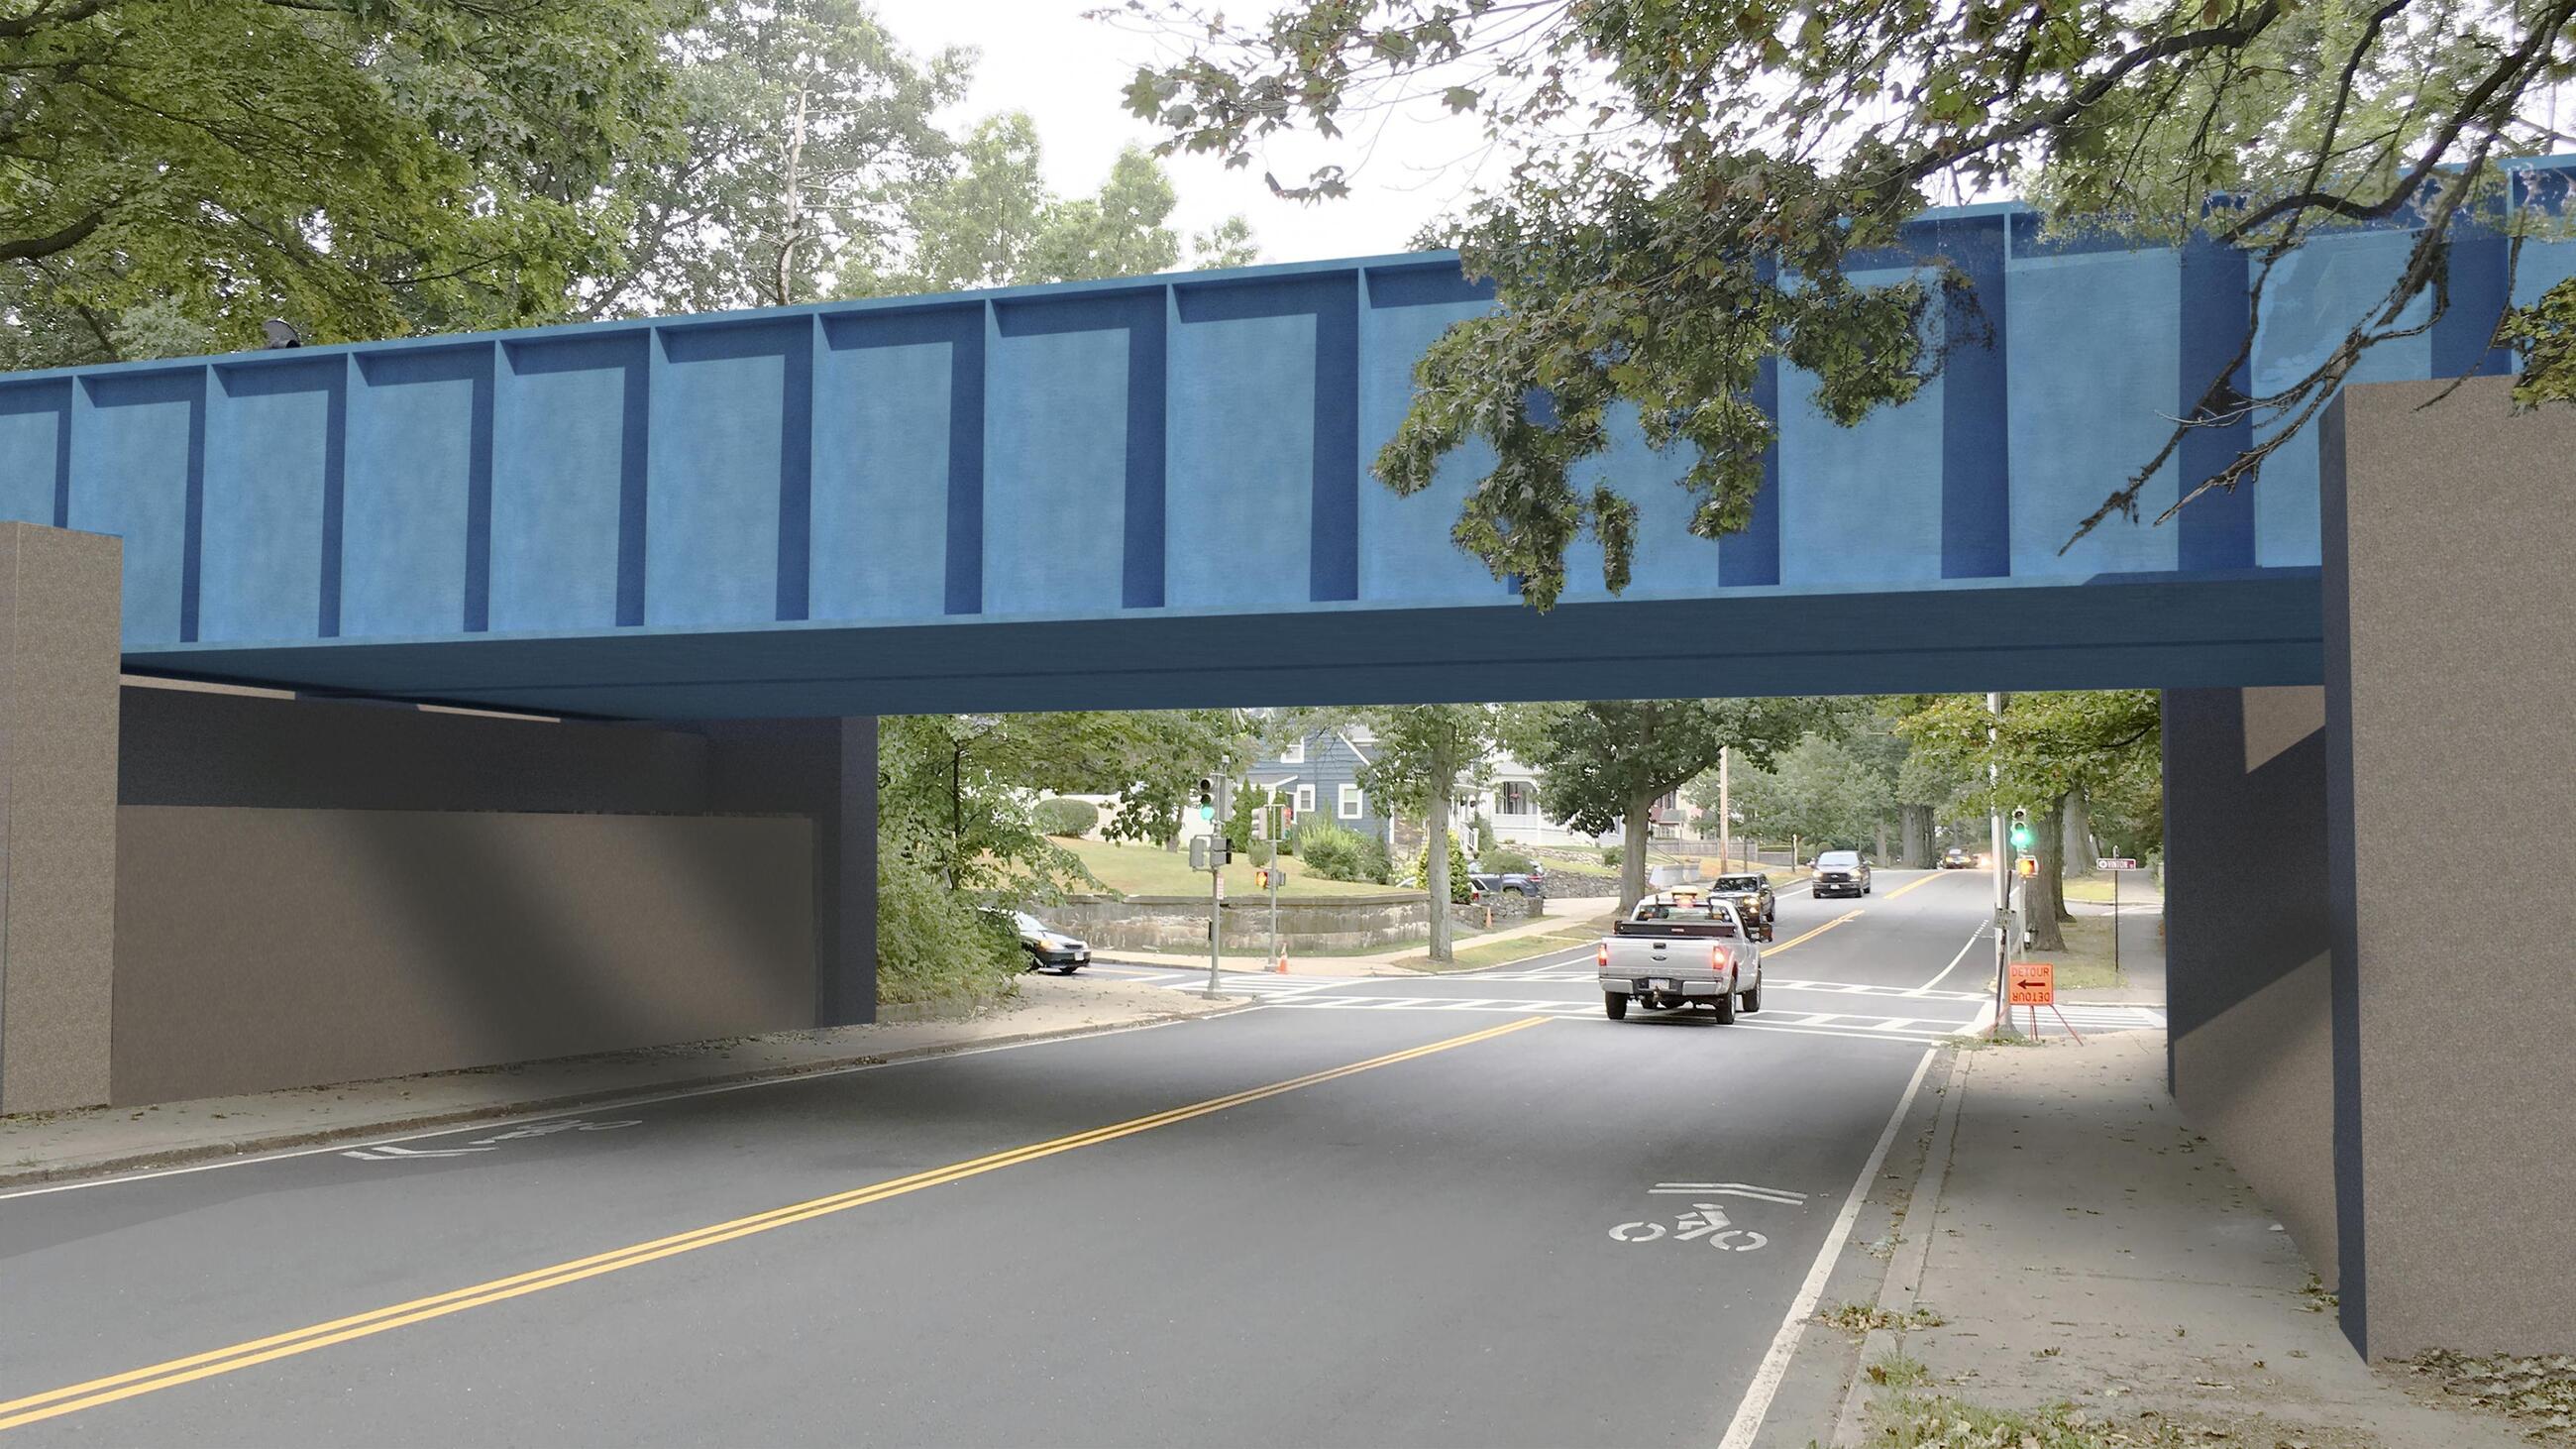 A rendering of the proposed changes to the Lynn Fells Parkway bridge on the Haverhill Line of the Commuter Rail